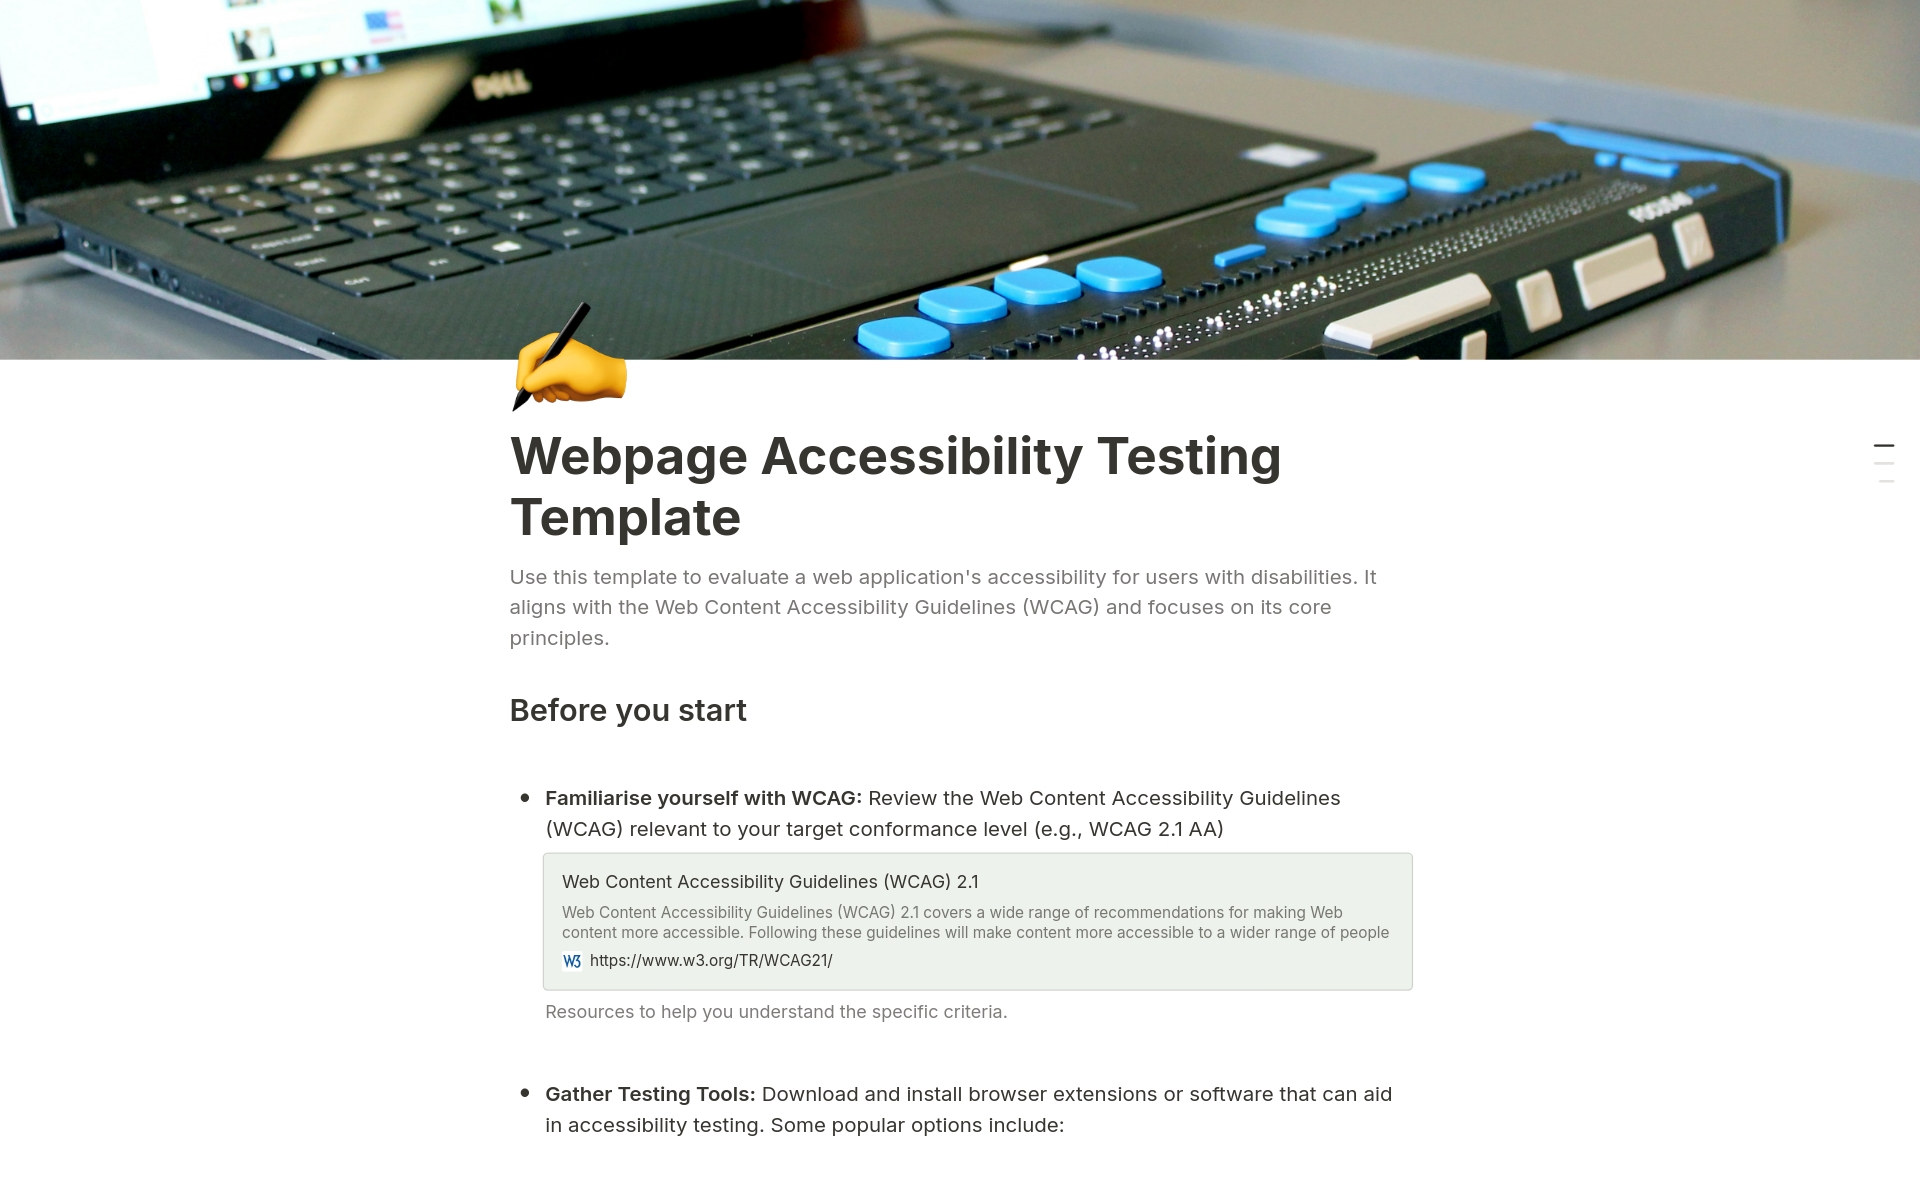 Use this template to evaluate a web application's accessibility for users with disabilities. It aligns with the Web Content Accessibility Guidelines (WCAG) and focuses on its core principles.